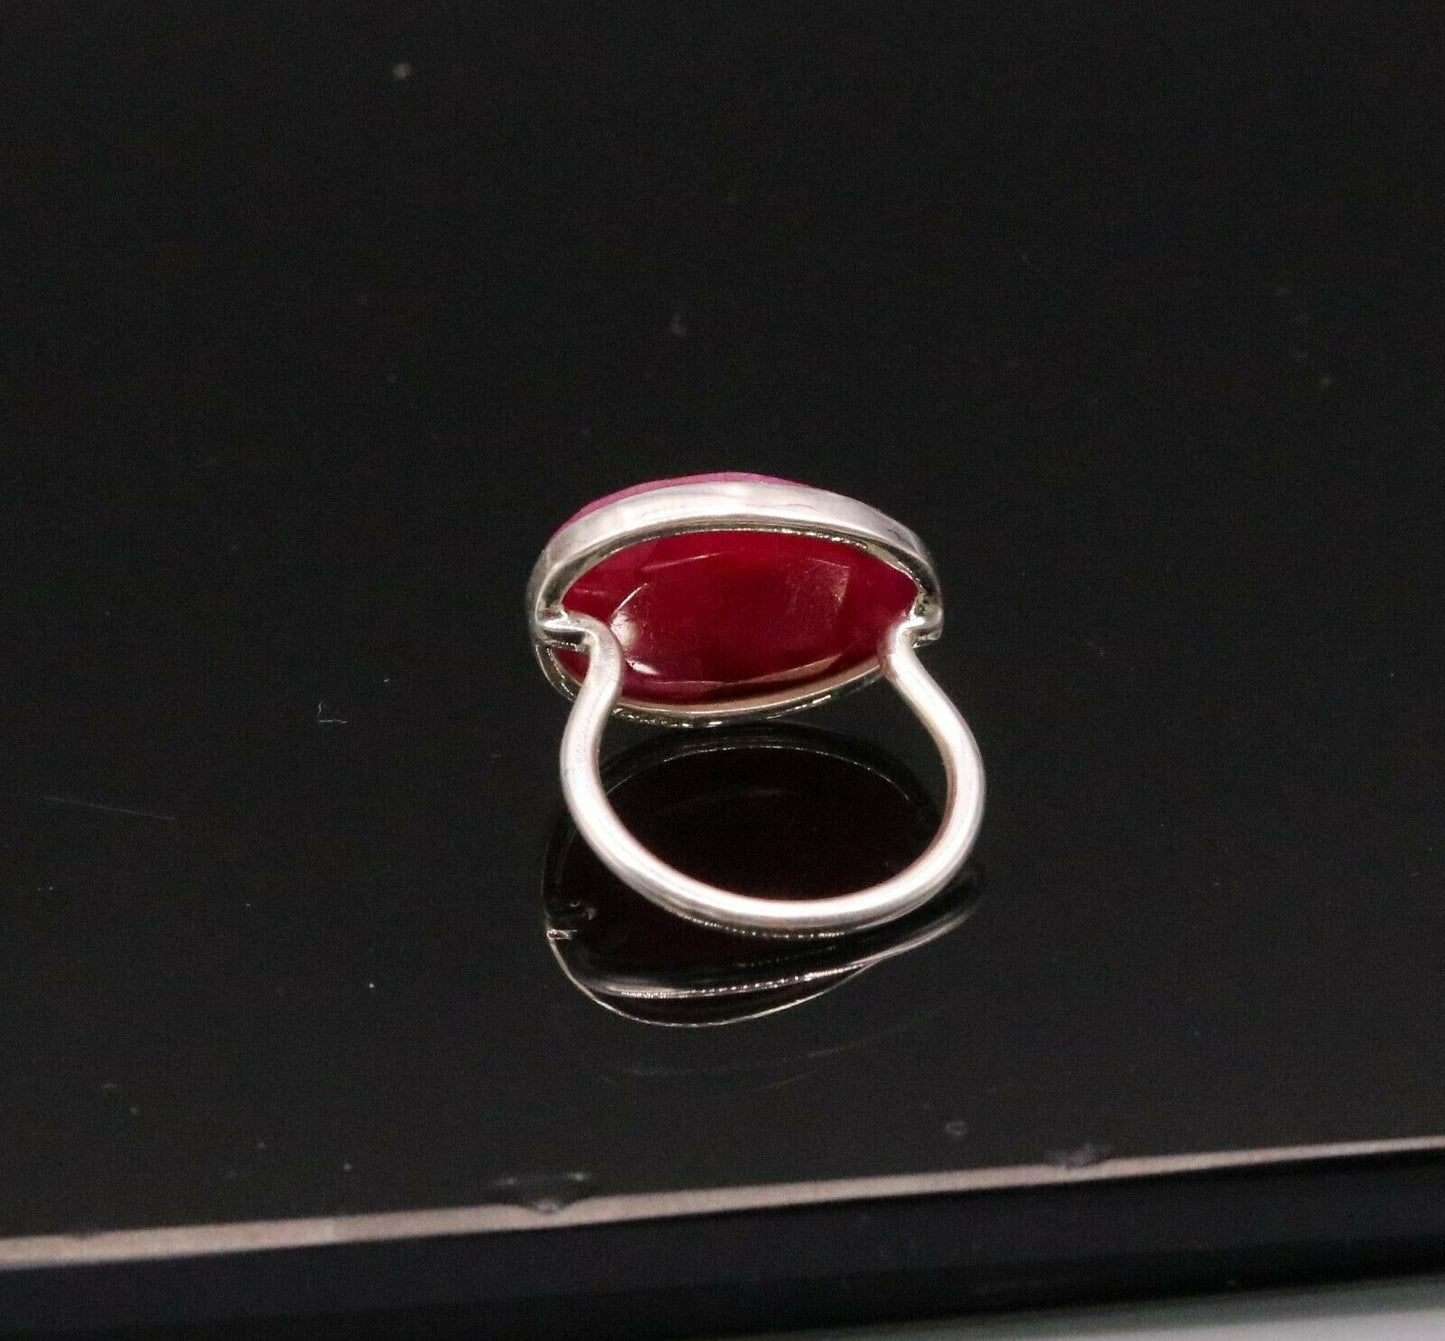 SIMULATED RUBY AWESOME 925 SOLID SILVER HANDMADE RING BAND UNISEX JEWELRY sr117 - TRIBAL ORNAMENTS